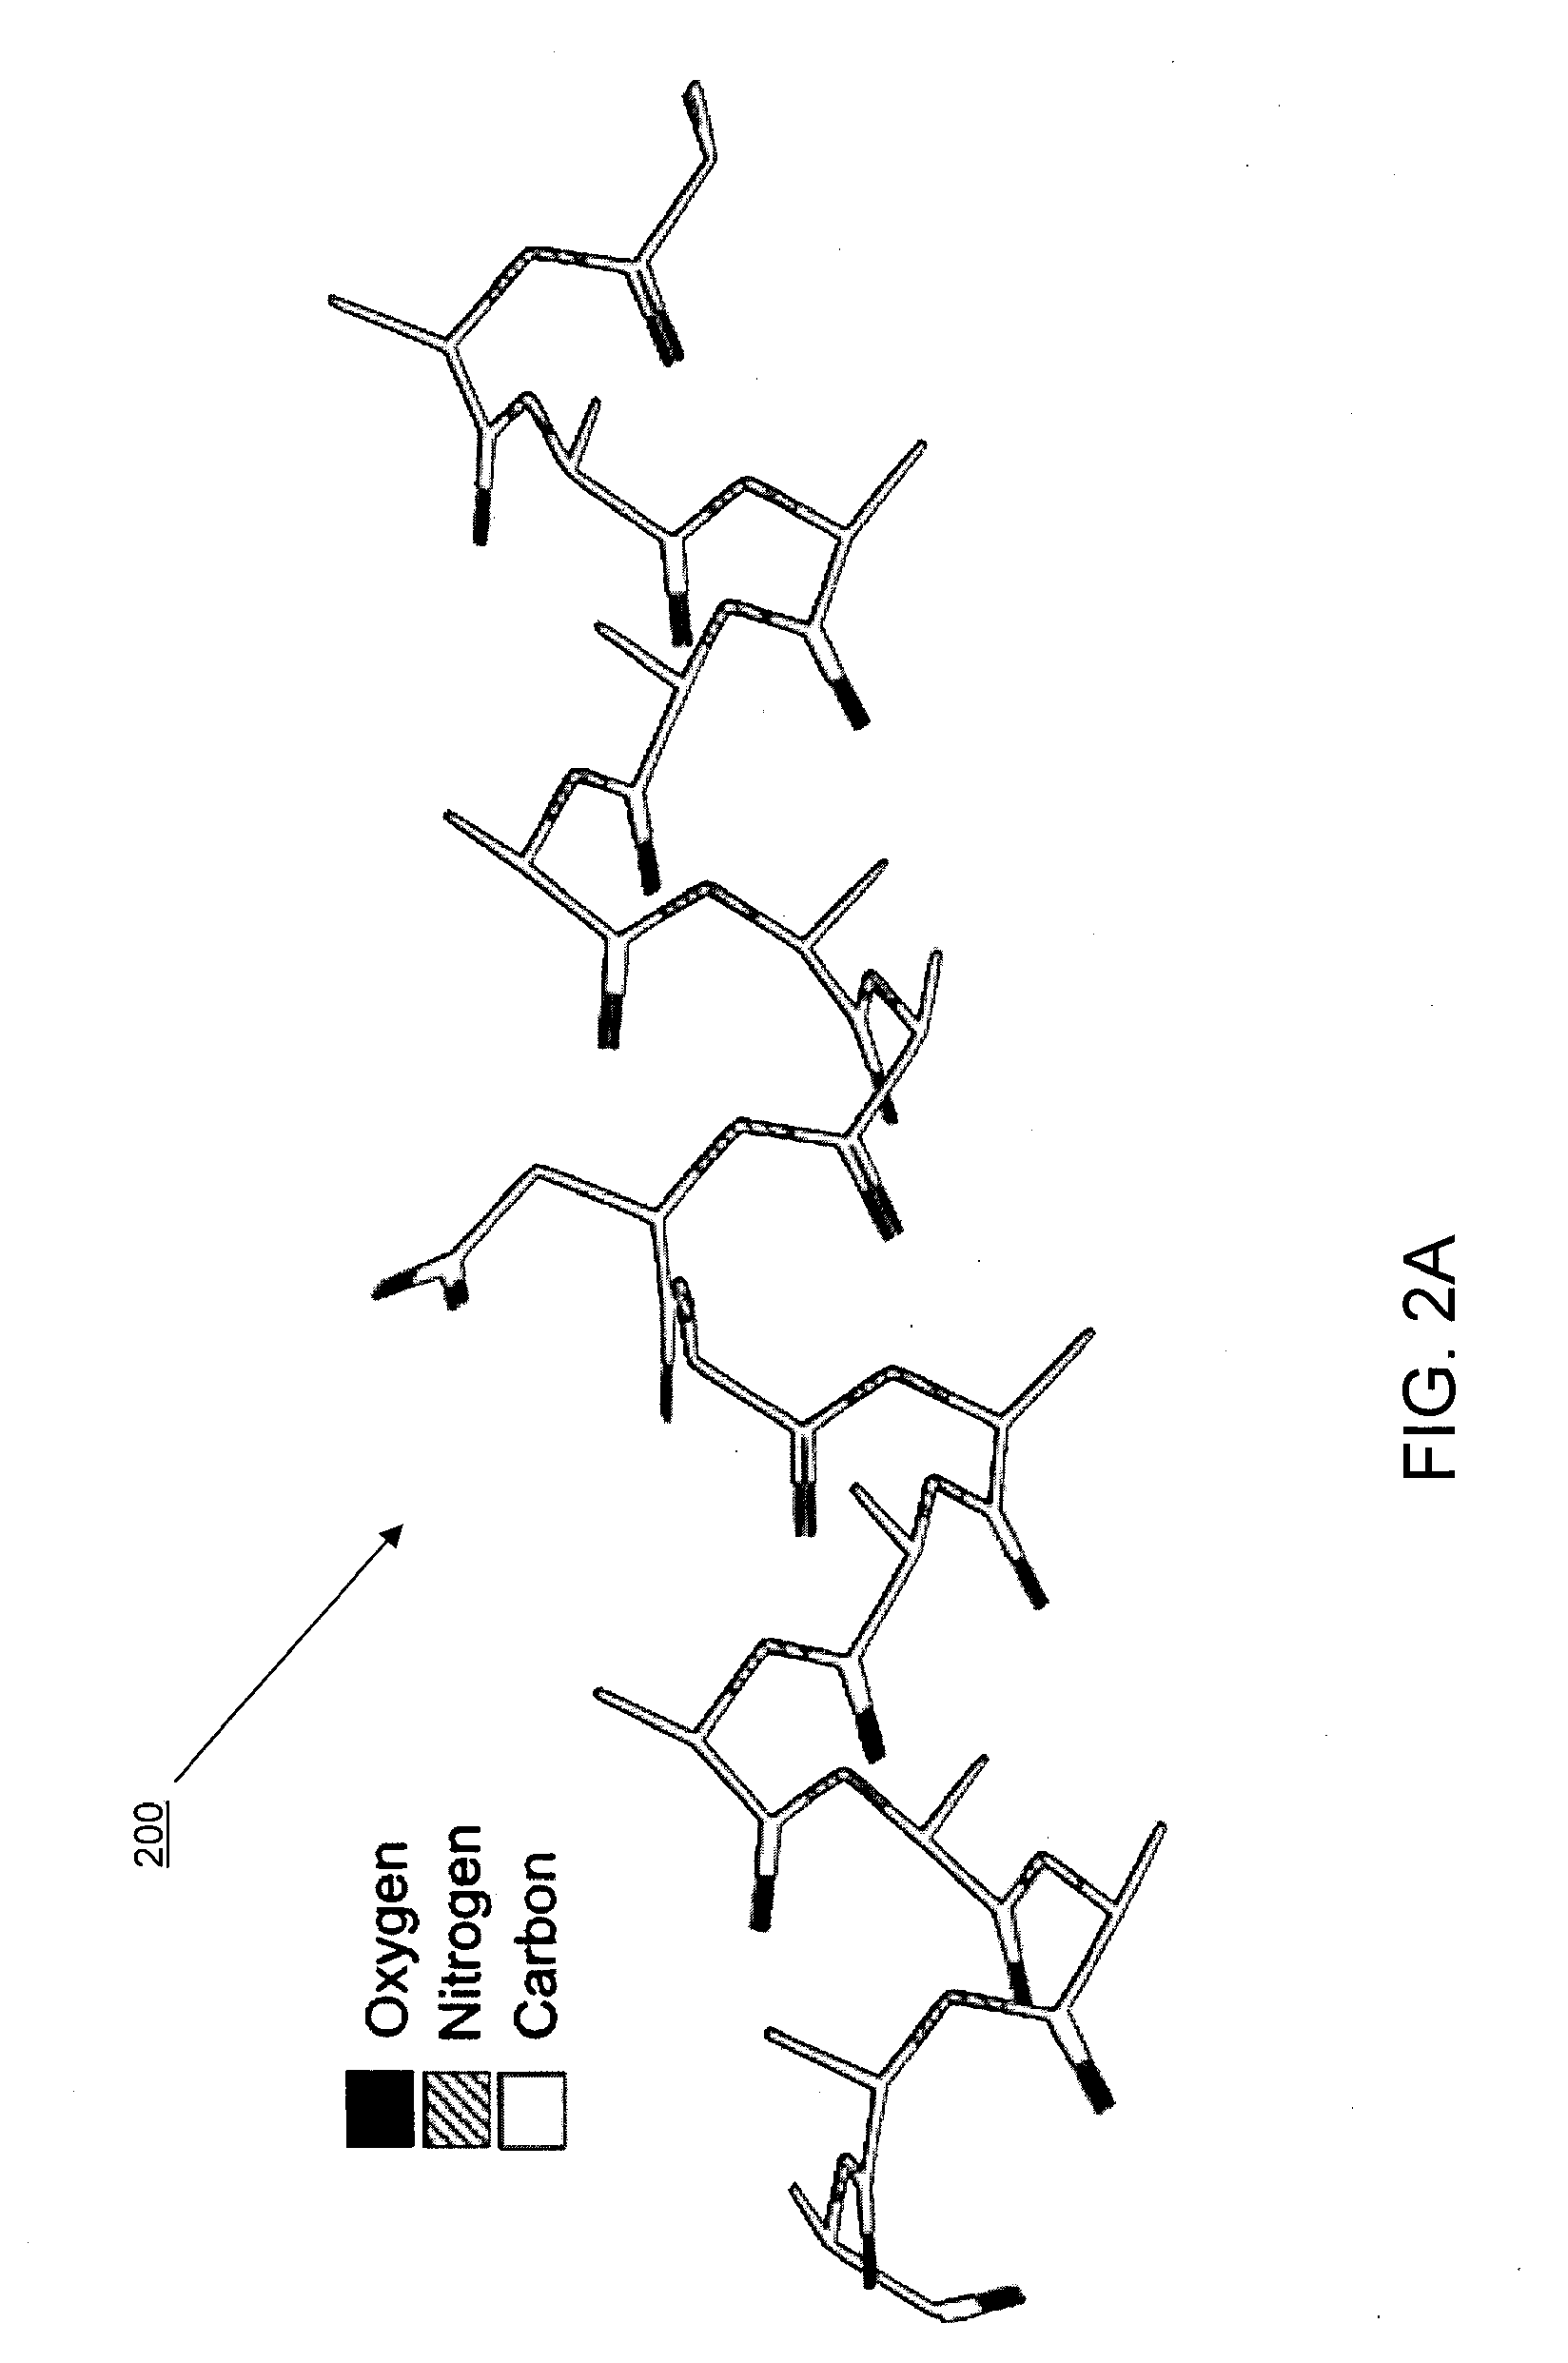 Methods and systems for optimization of peptide screening